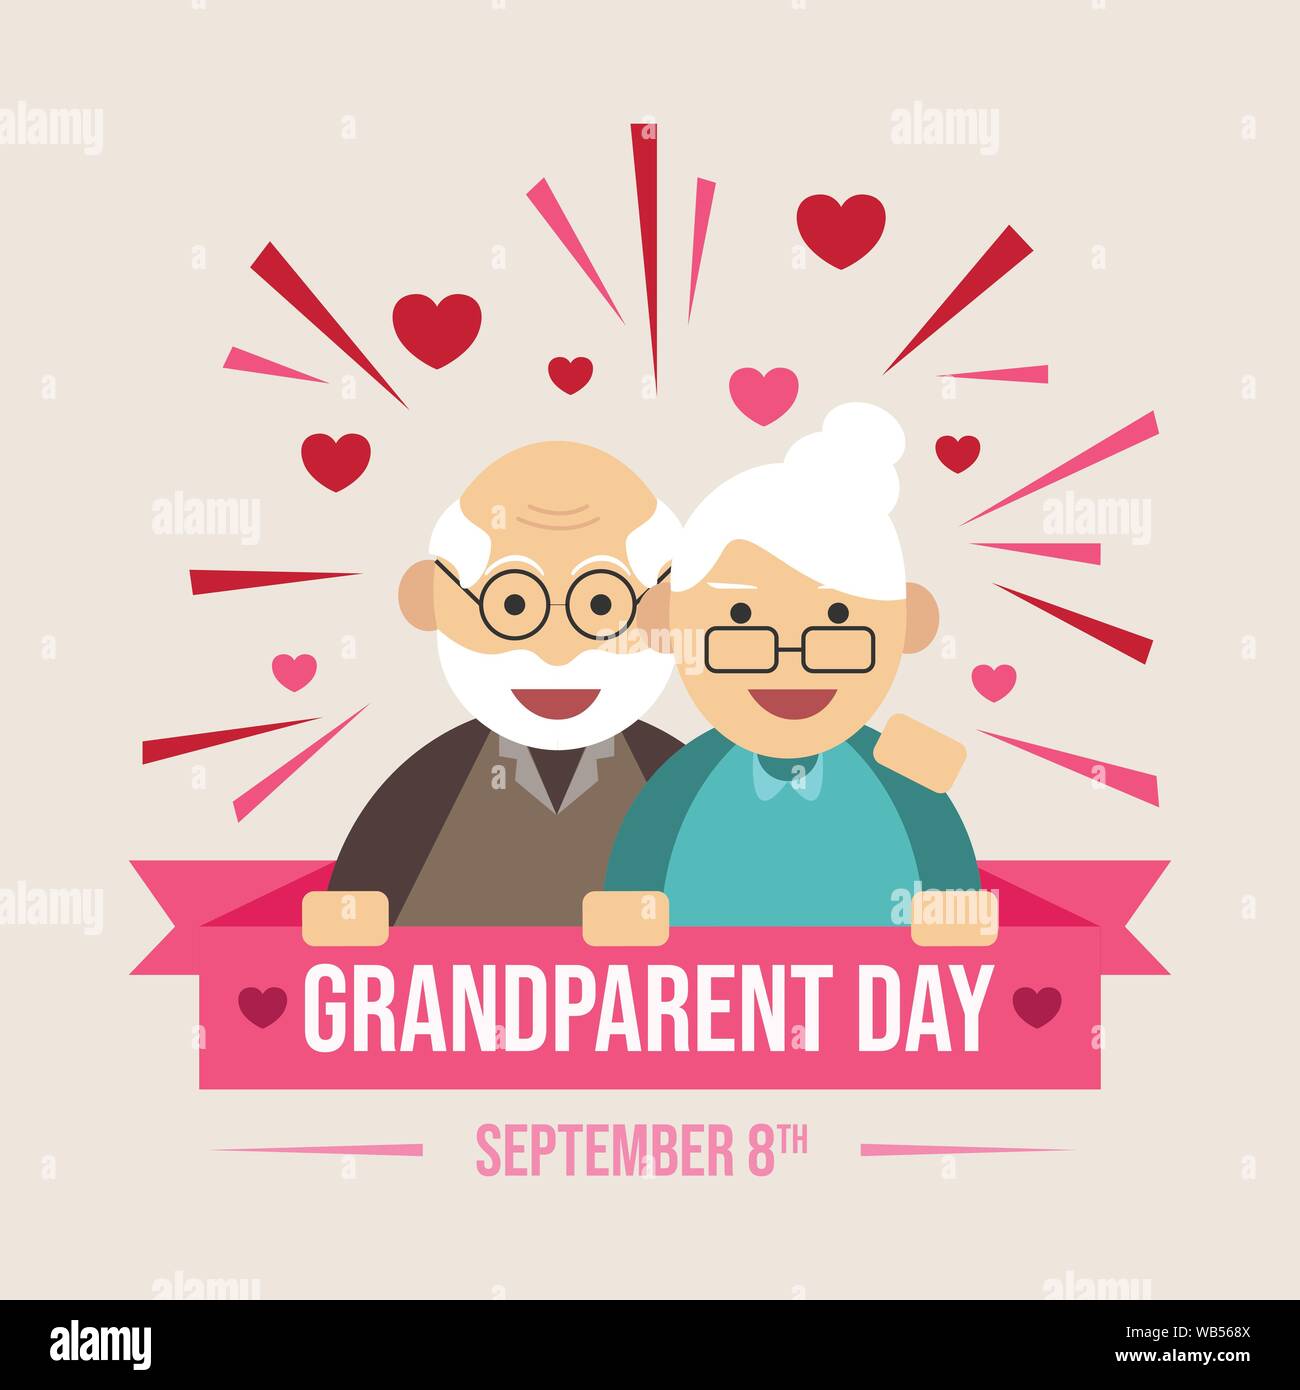 10 Sweet Ways to Celebrate Grandparents Day